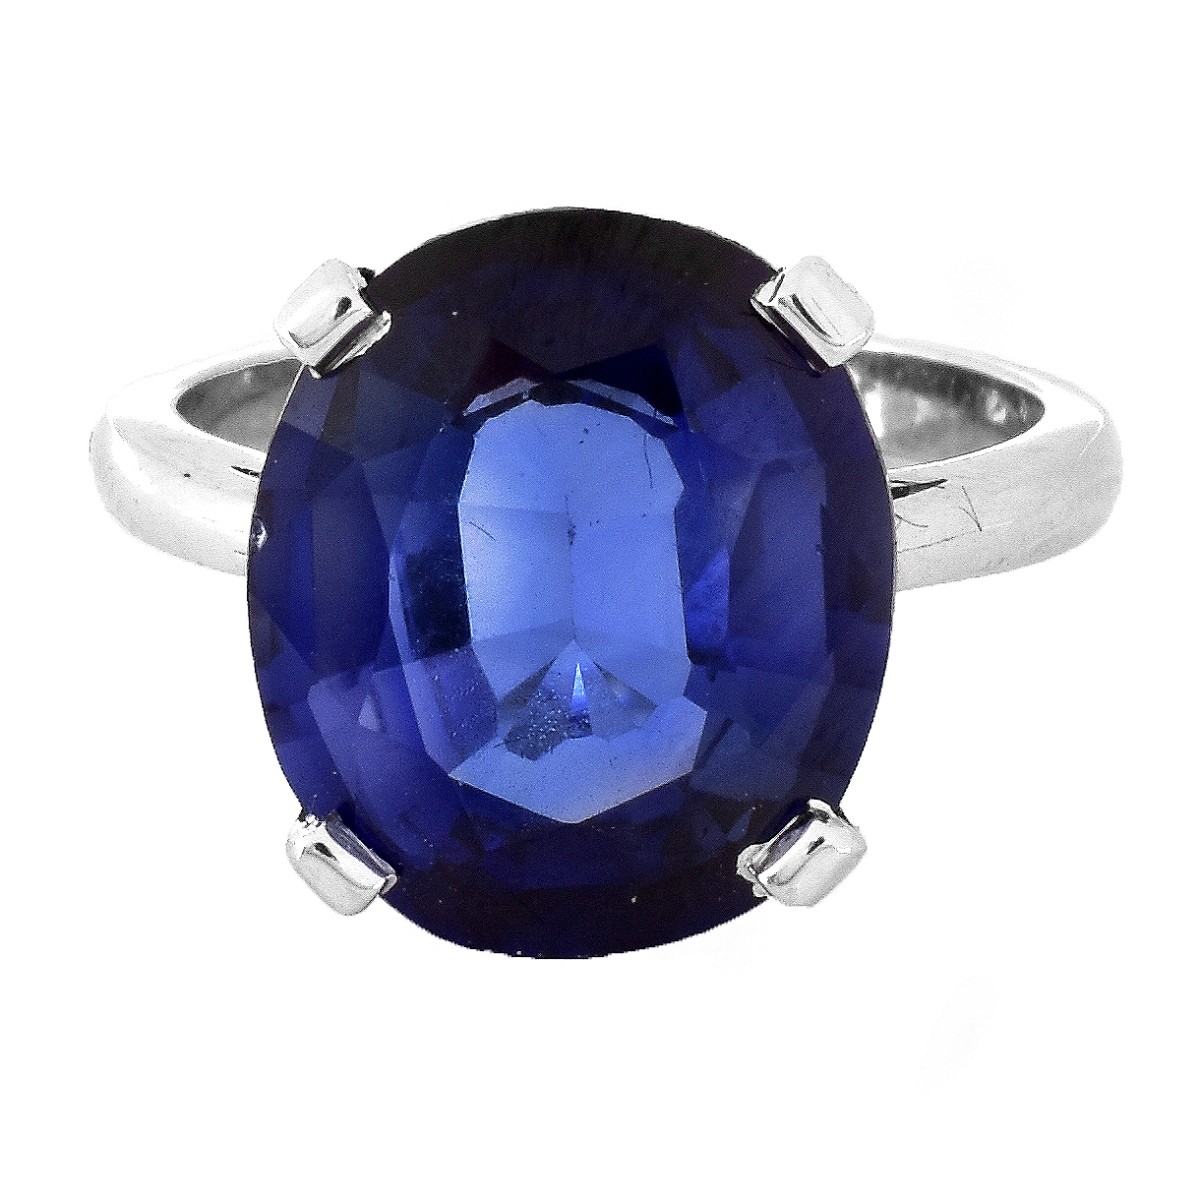 ASGL Sapphire and 14K Gold Ring